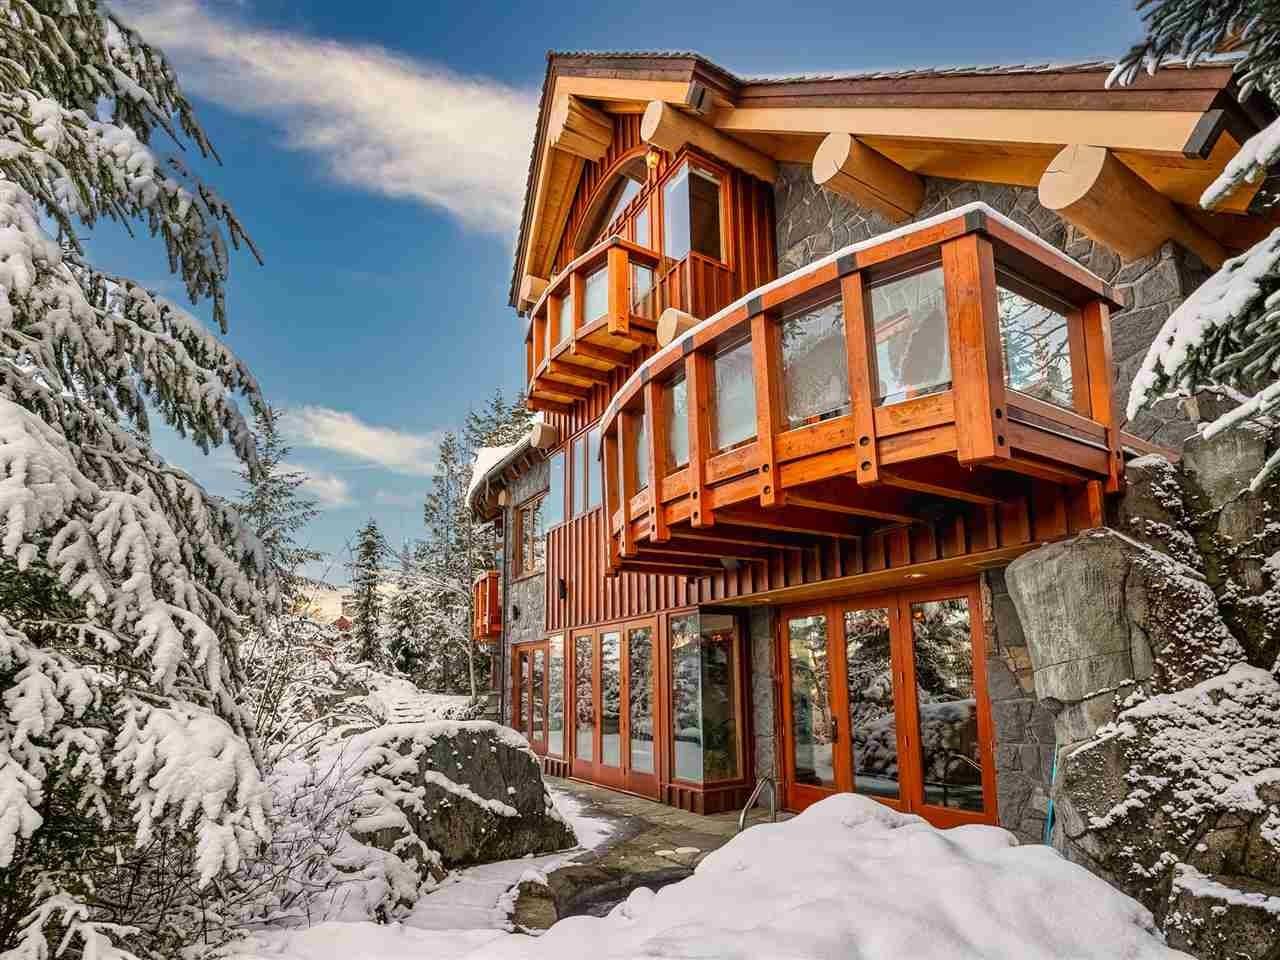 Large cabin-design home in a snowy, forested setting.